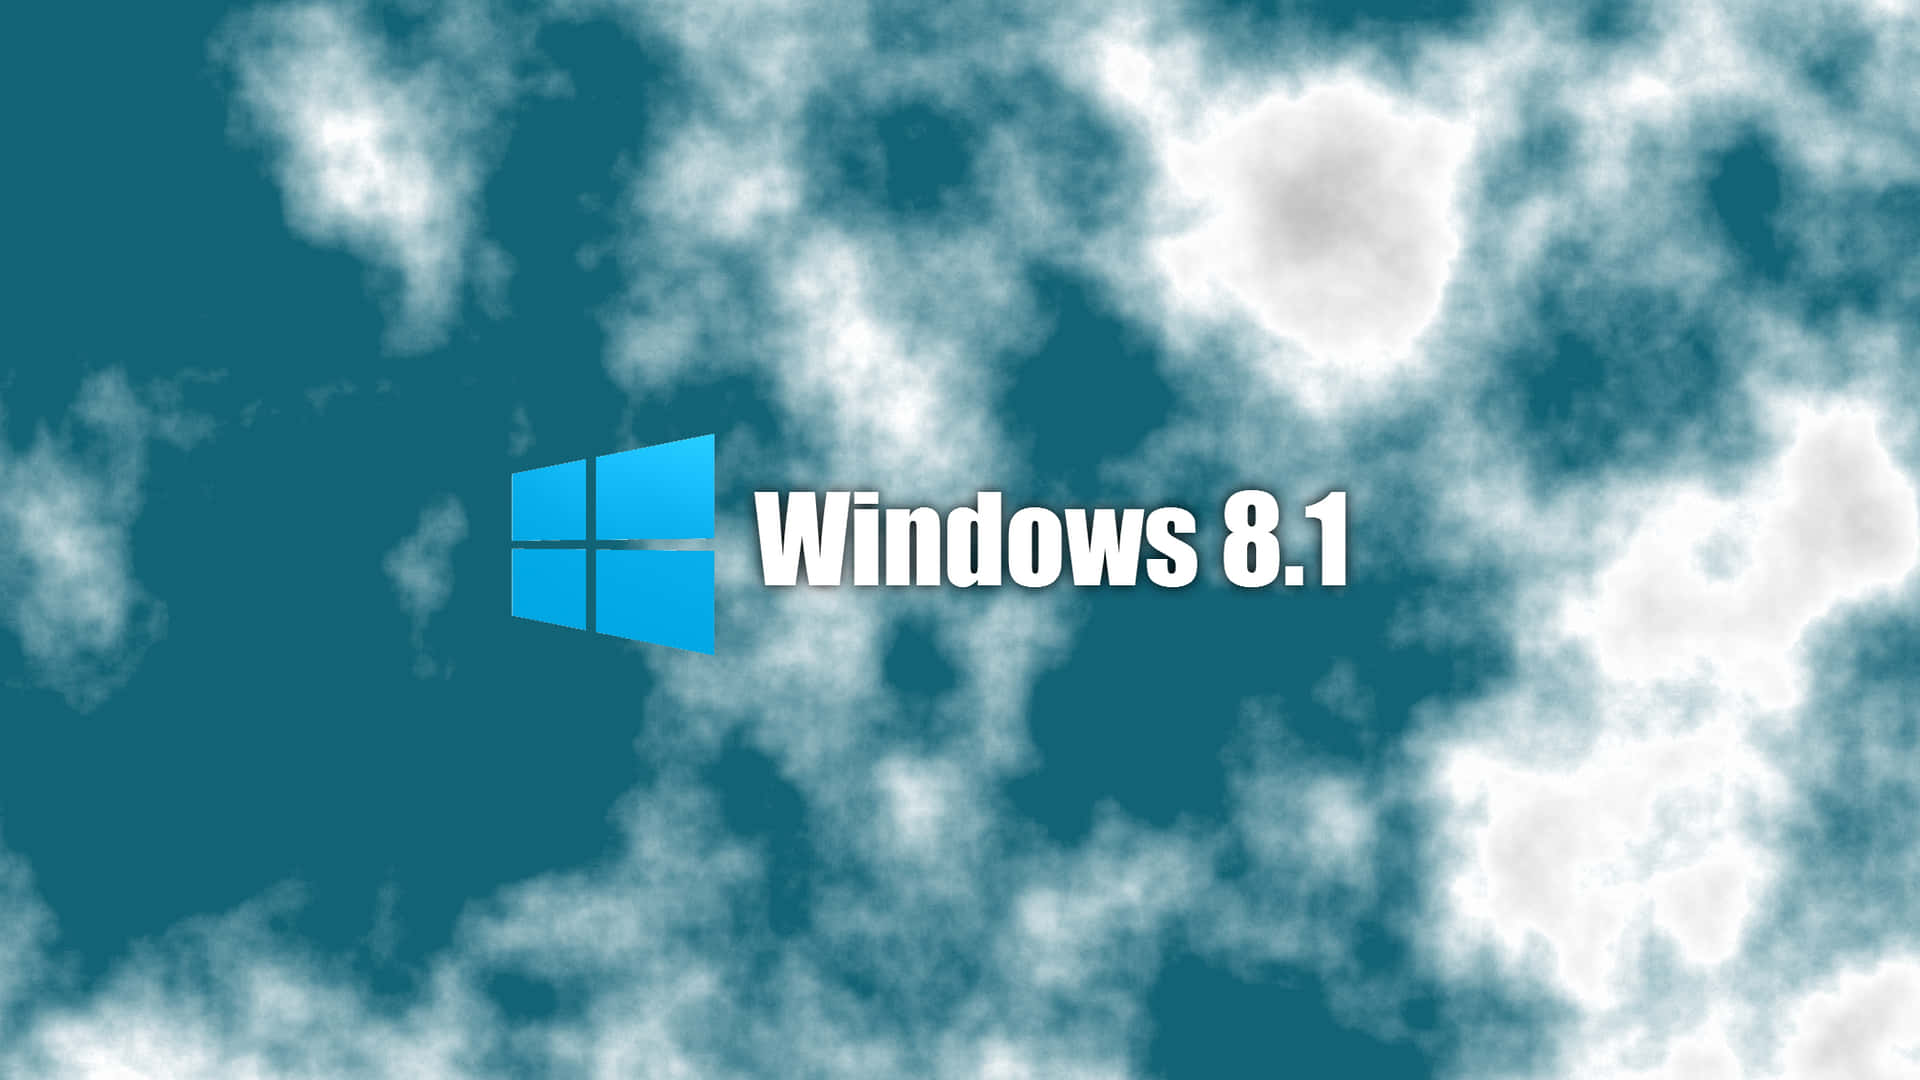 Experience The Latest Version Of Windows With Windows 8.1